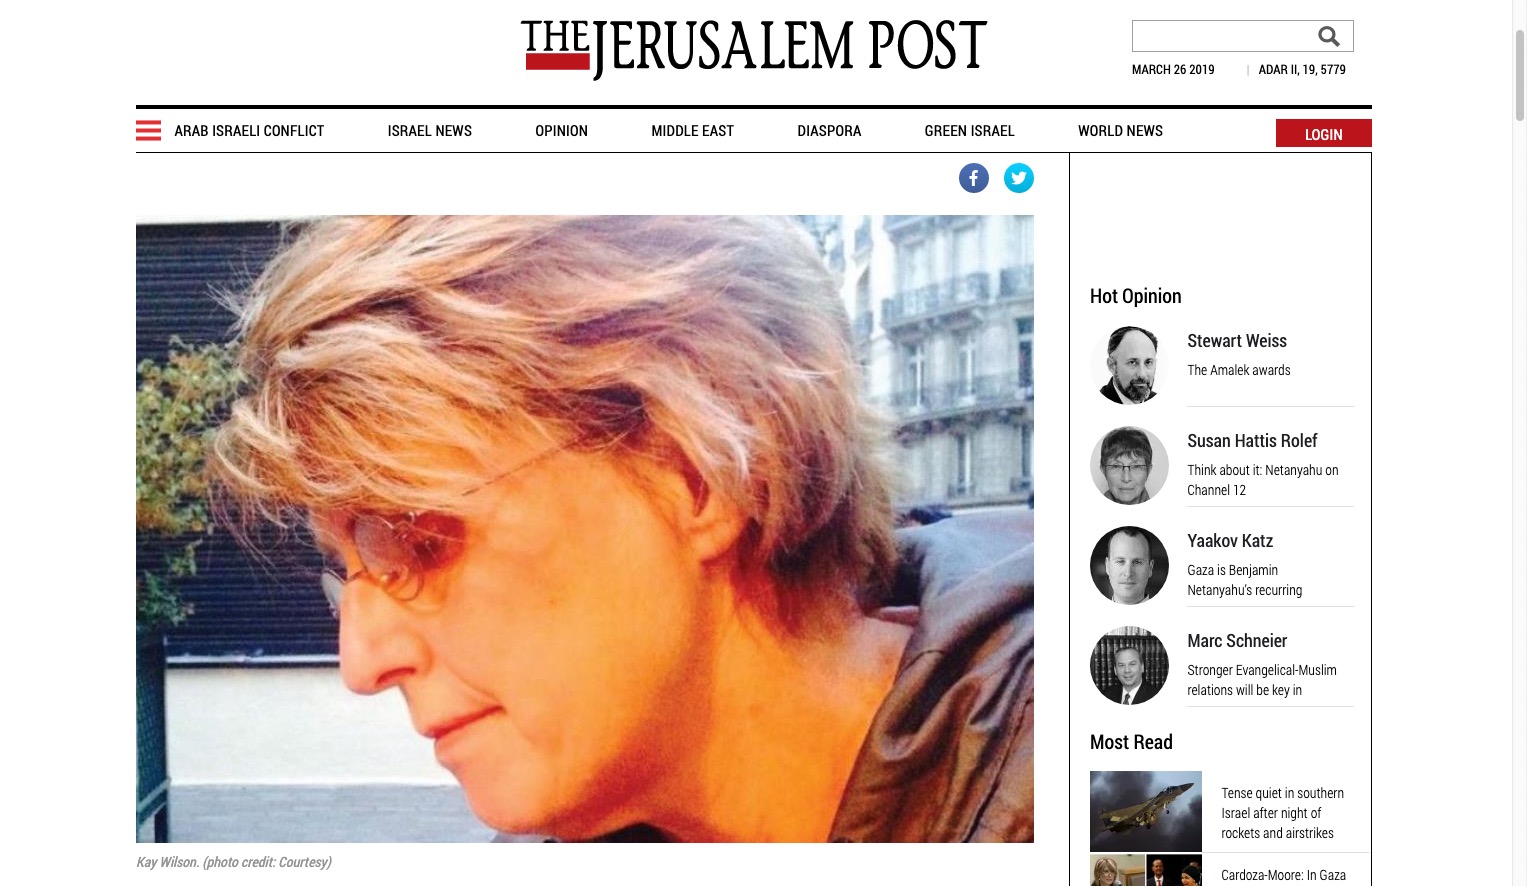 The Rage Less Traveled in the Jerusalem Post